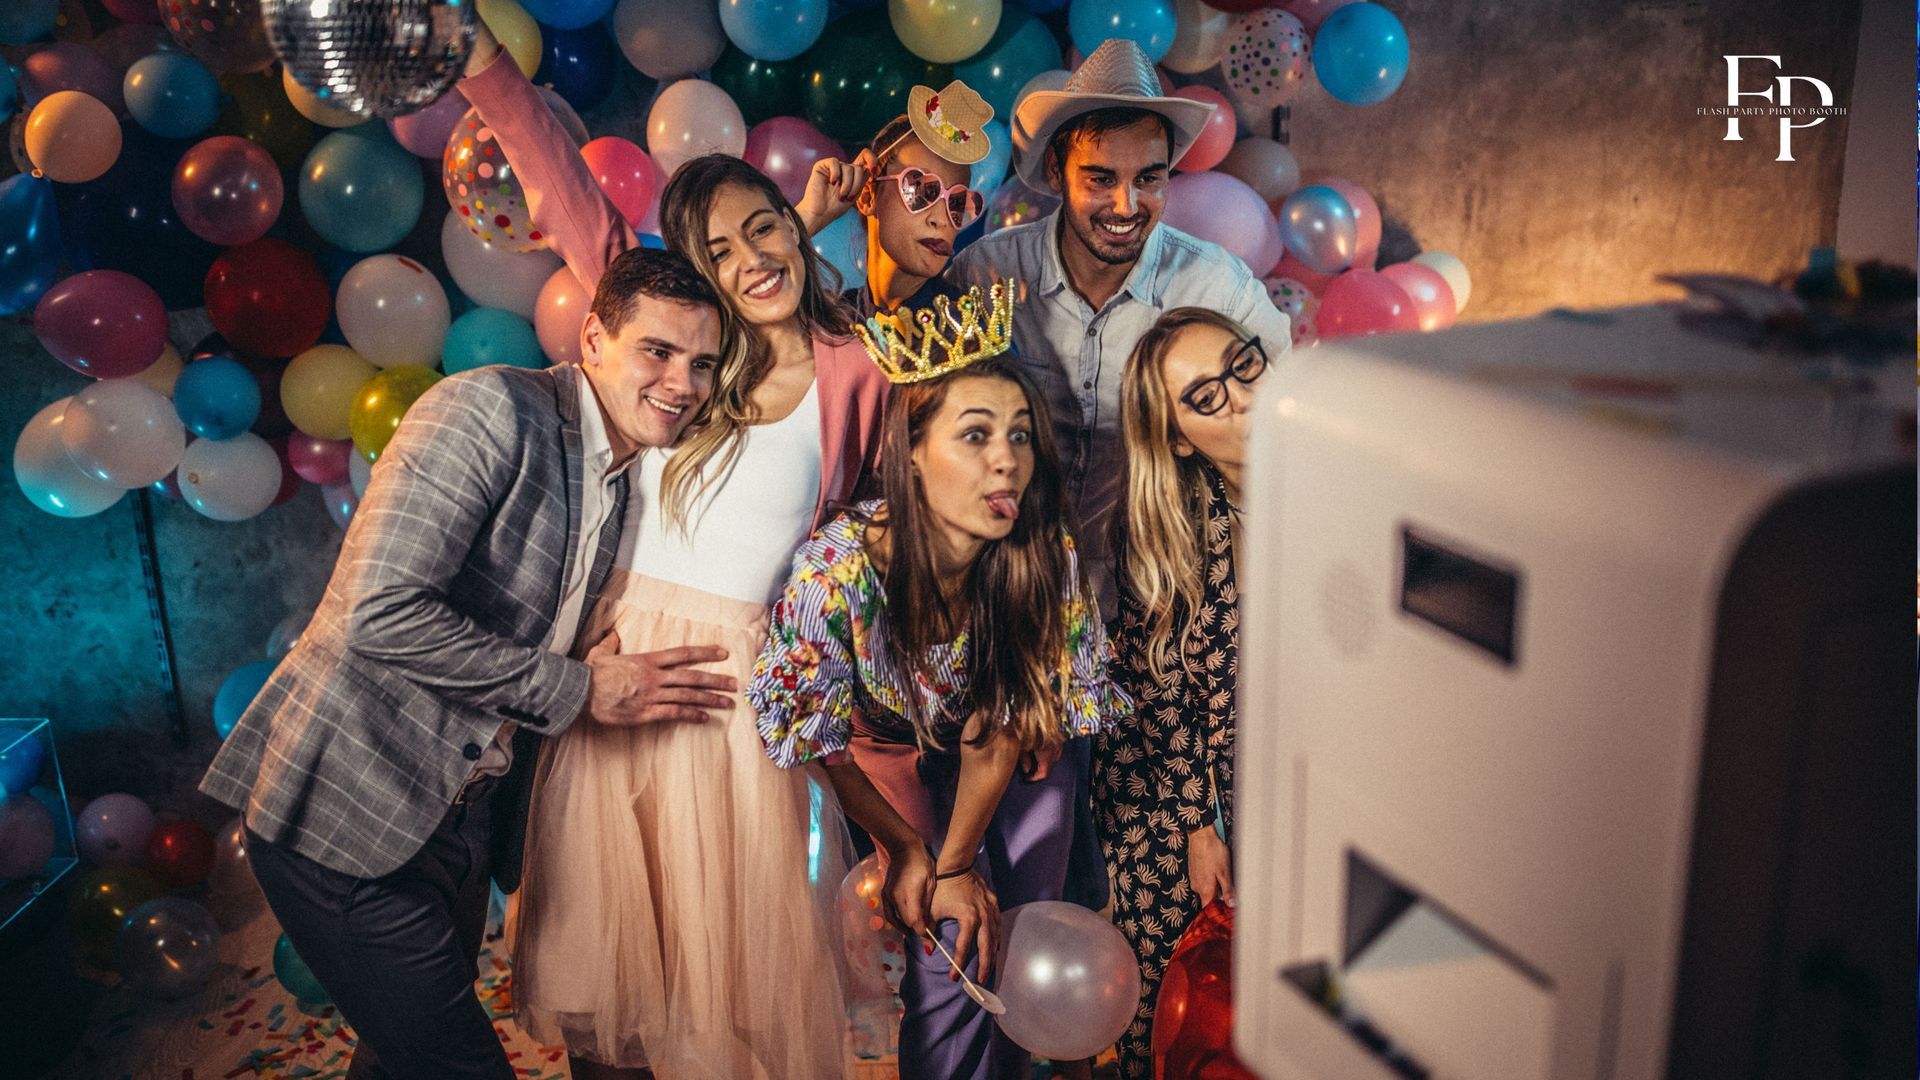 Graduates in San Antonio and friends make memories in a flash party photo booth.